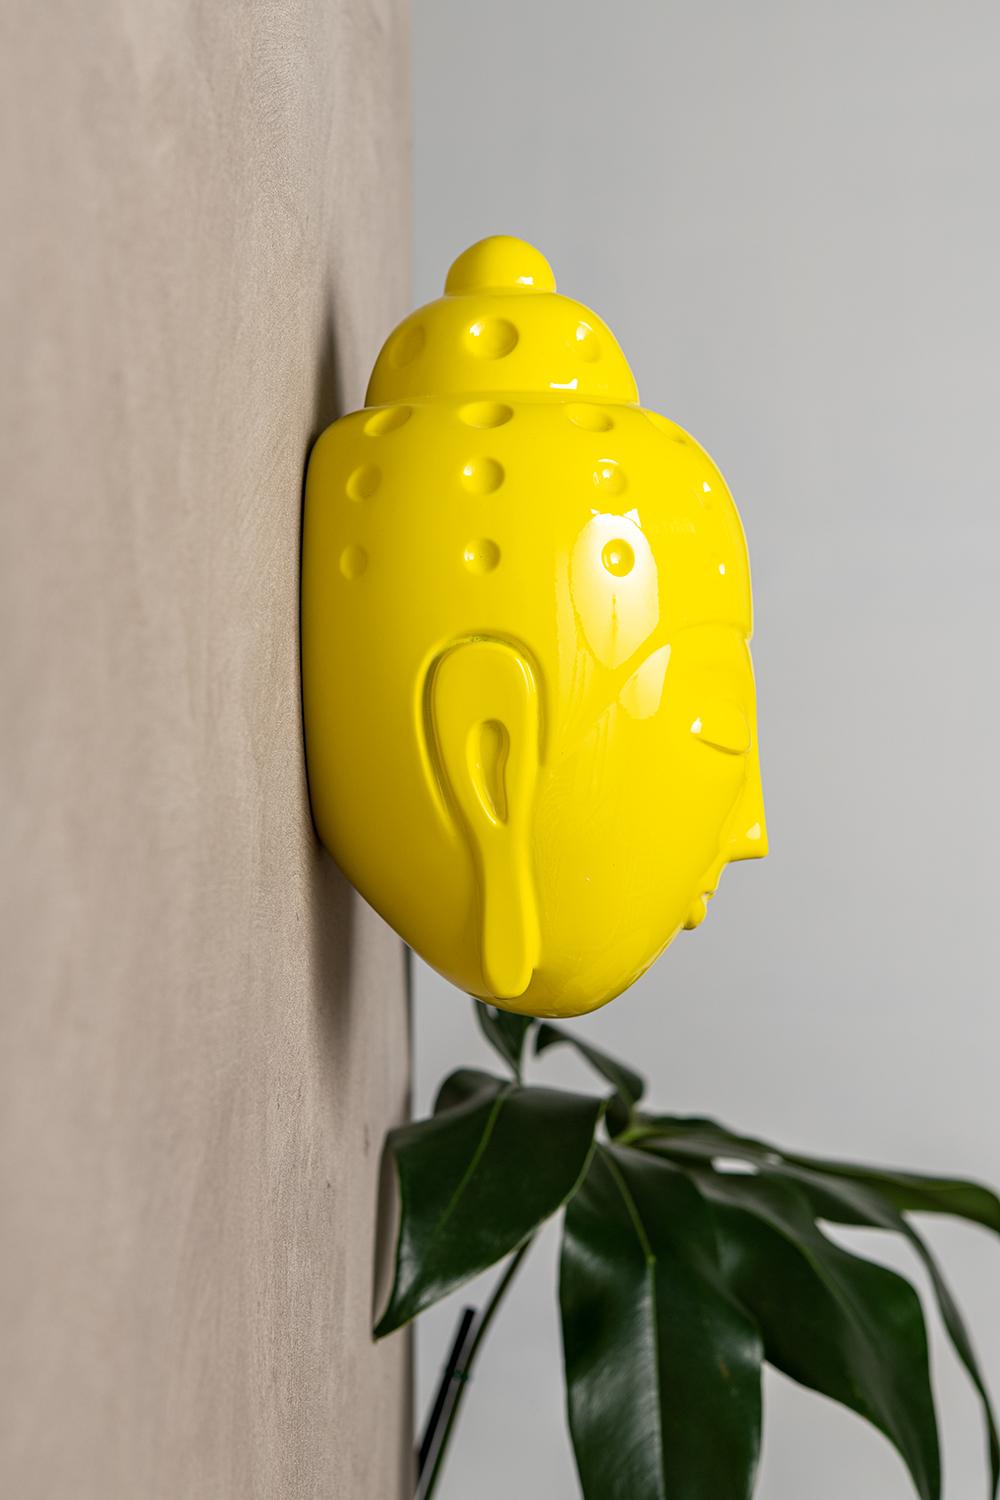 Contemporary buddha head sculpture - painted in yellow car paint - Sculpture by Tal Nehoray